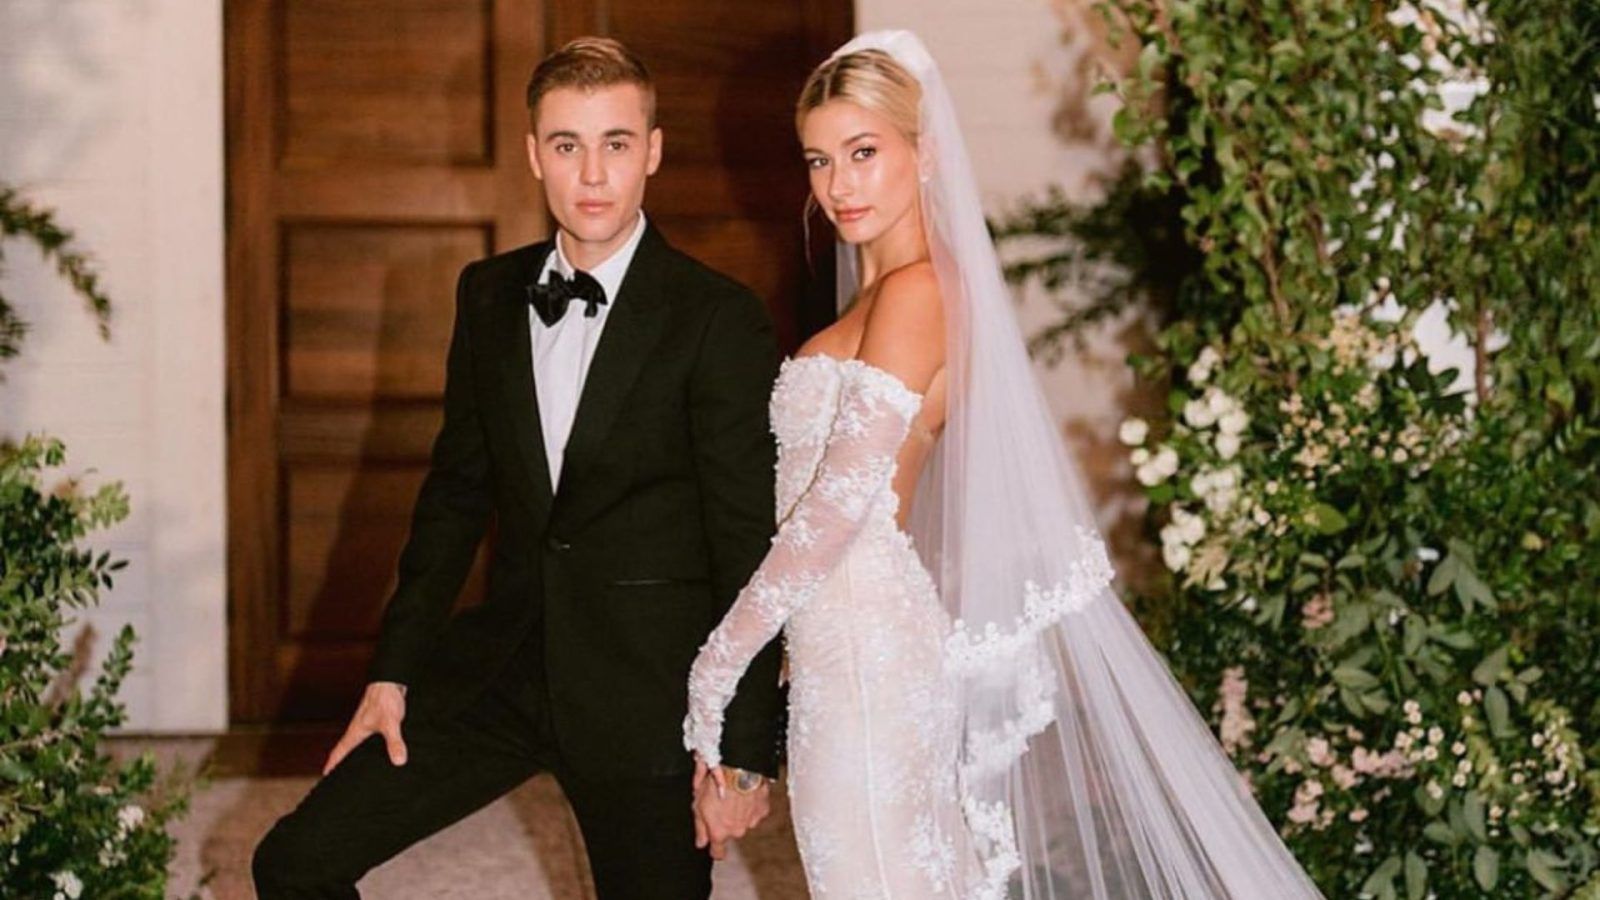 Hailey Bieber wedding dress lookbook and where to get similar ones